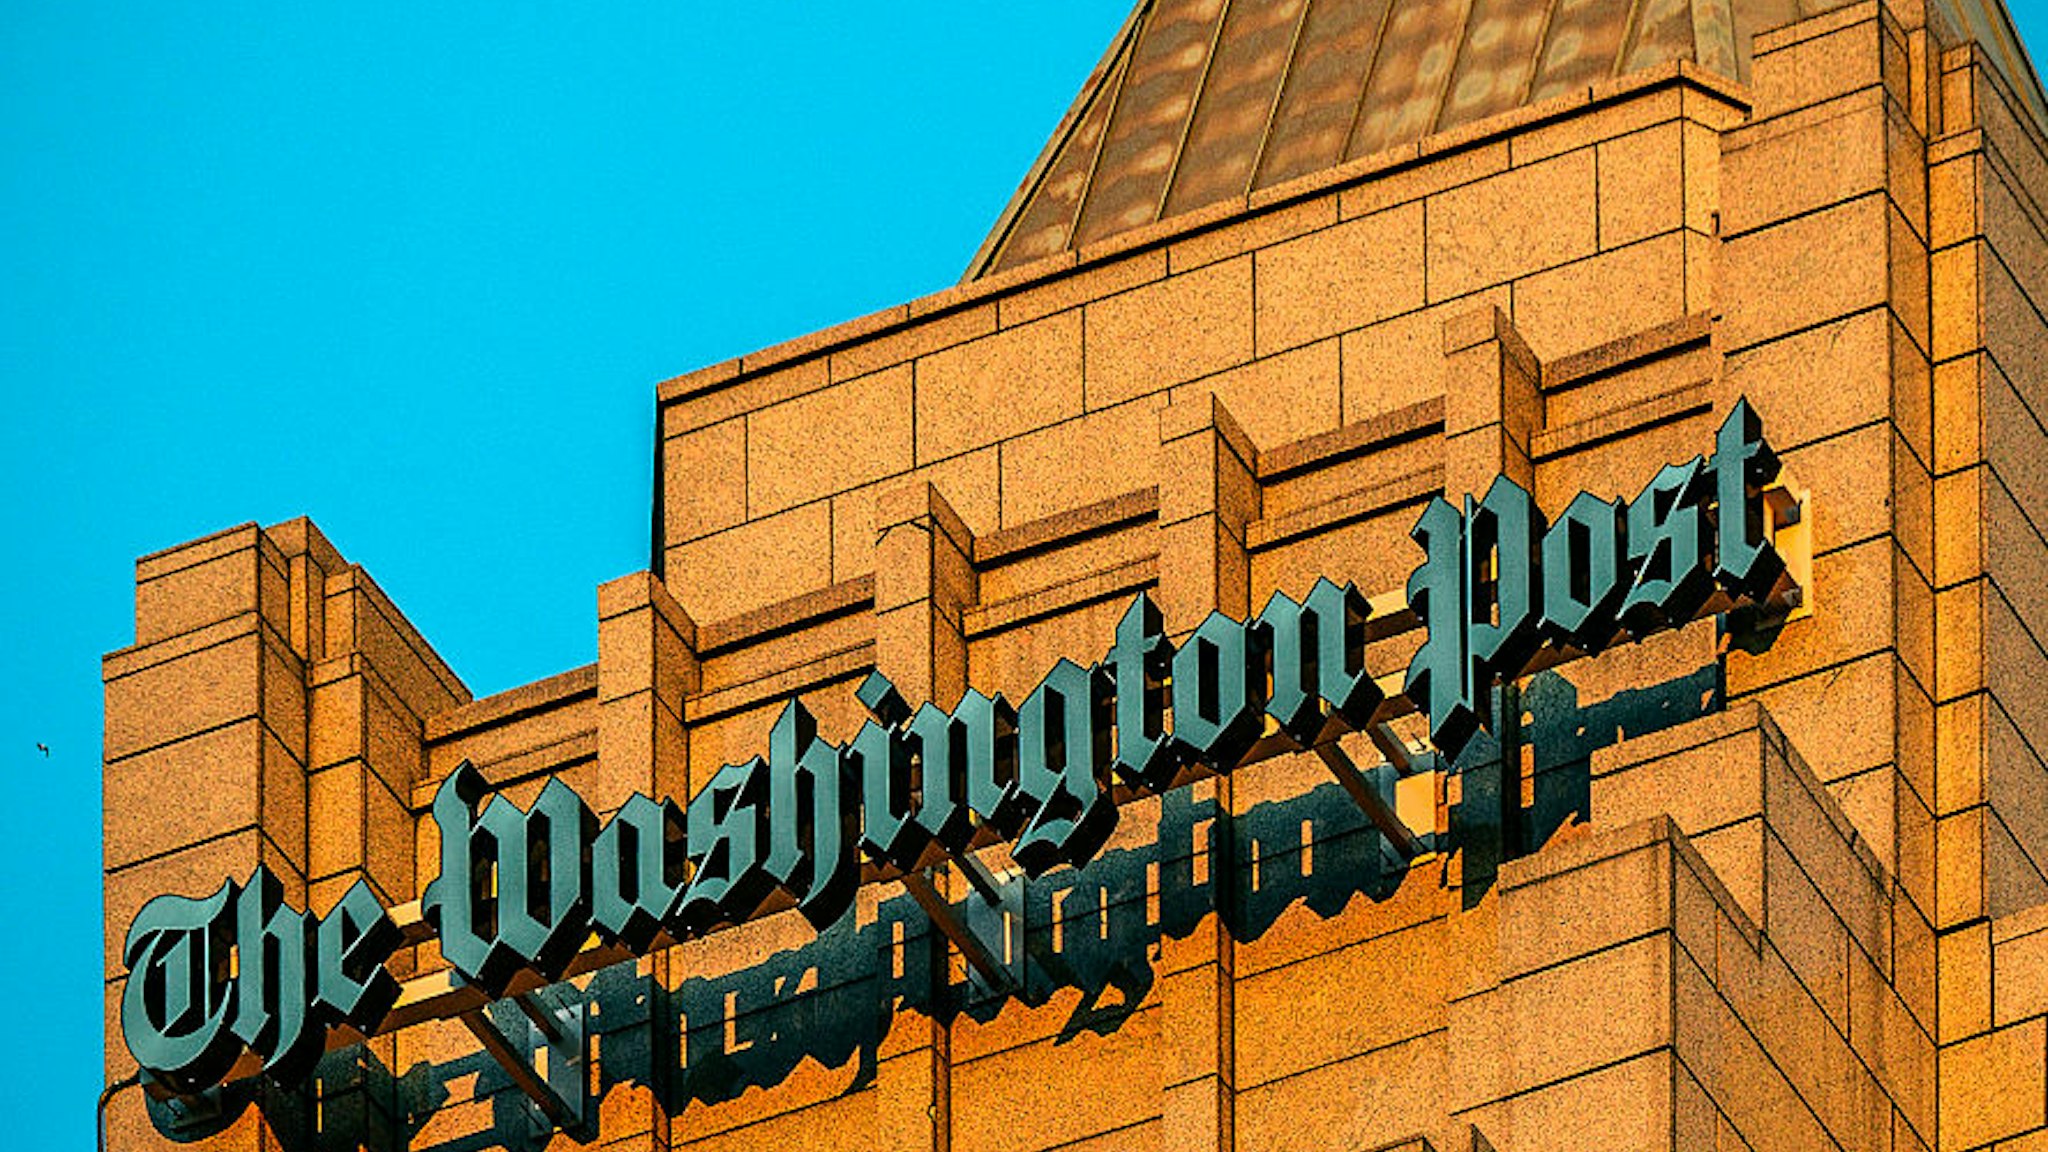 WASHINGTON, DC - DECEMBER 16: A view of the logo on the new home of The Washington Post via Getty Images, on December, 16, 2015 in Washington, DC. (Photo by Bill O'Leary/The Washington Post via Getty Images)